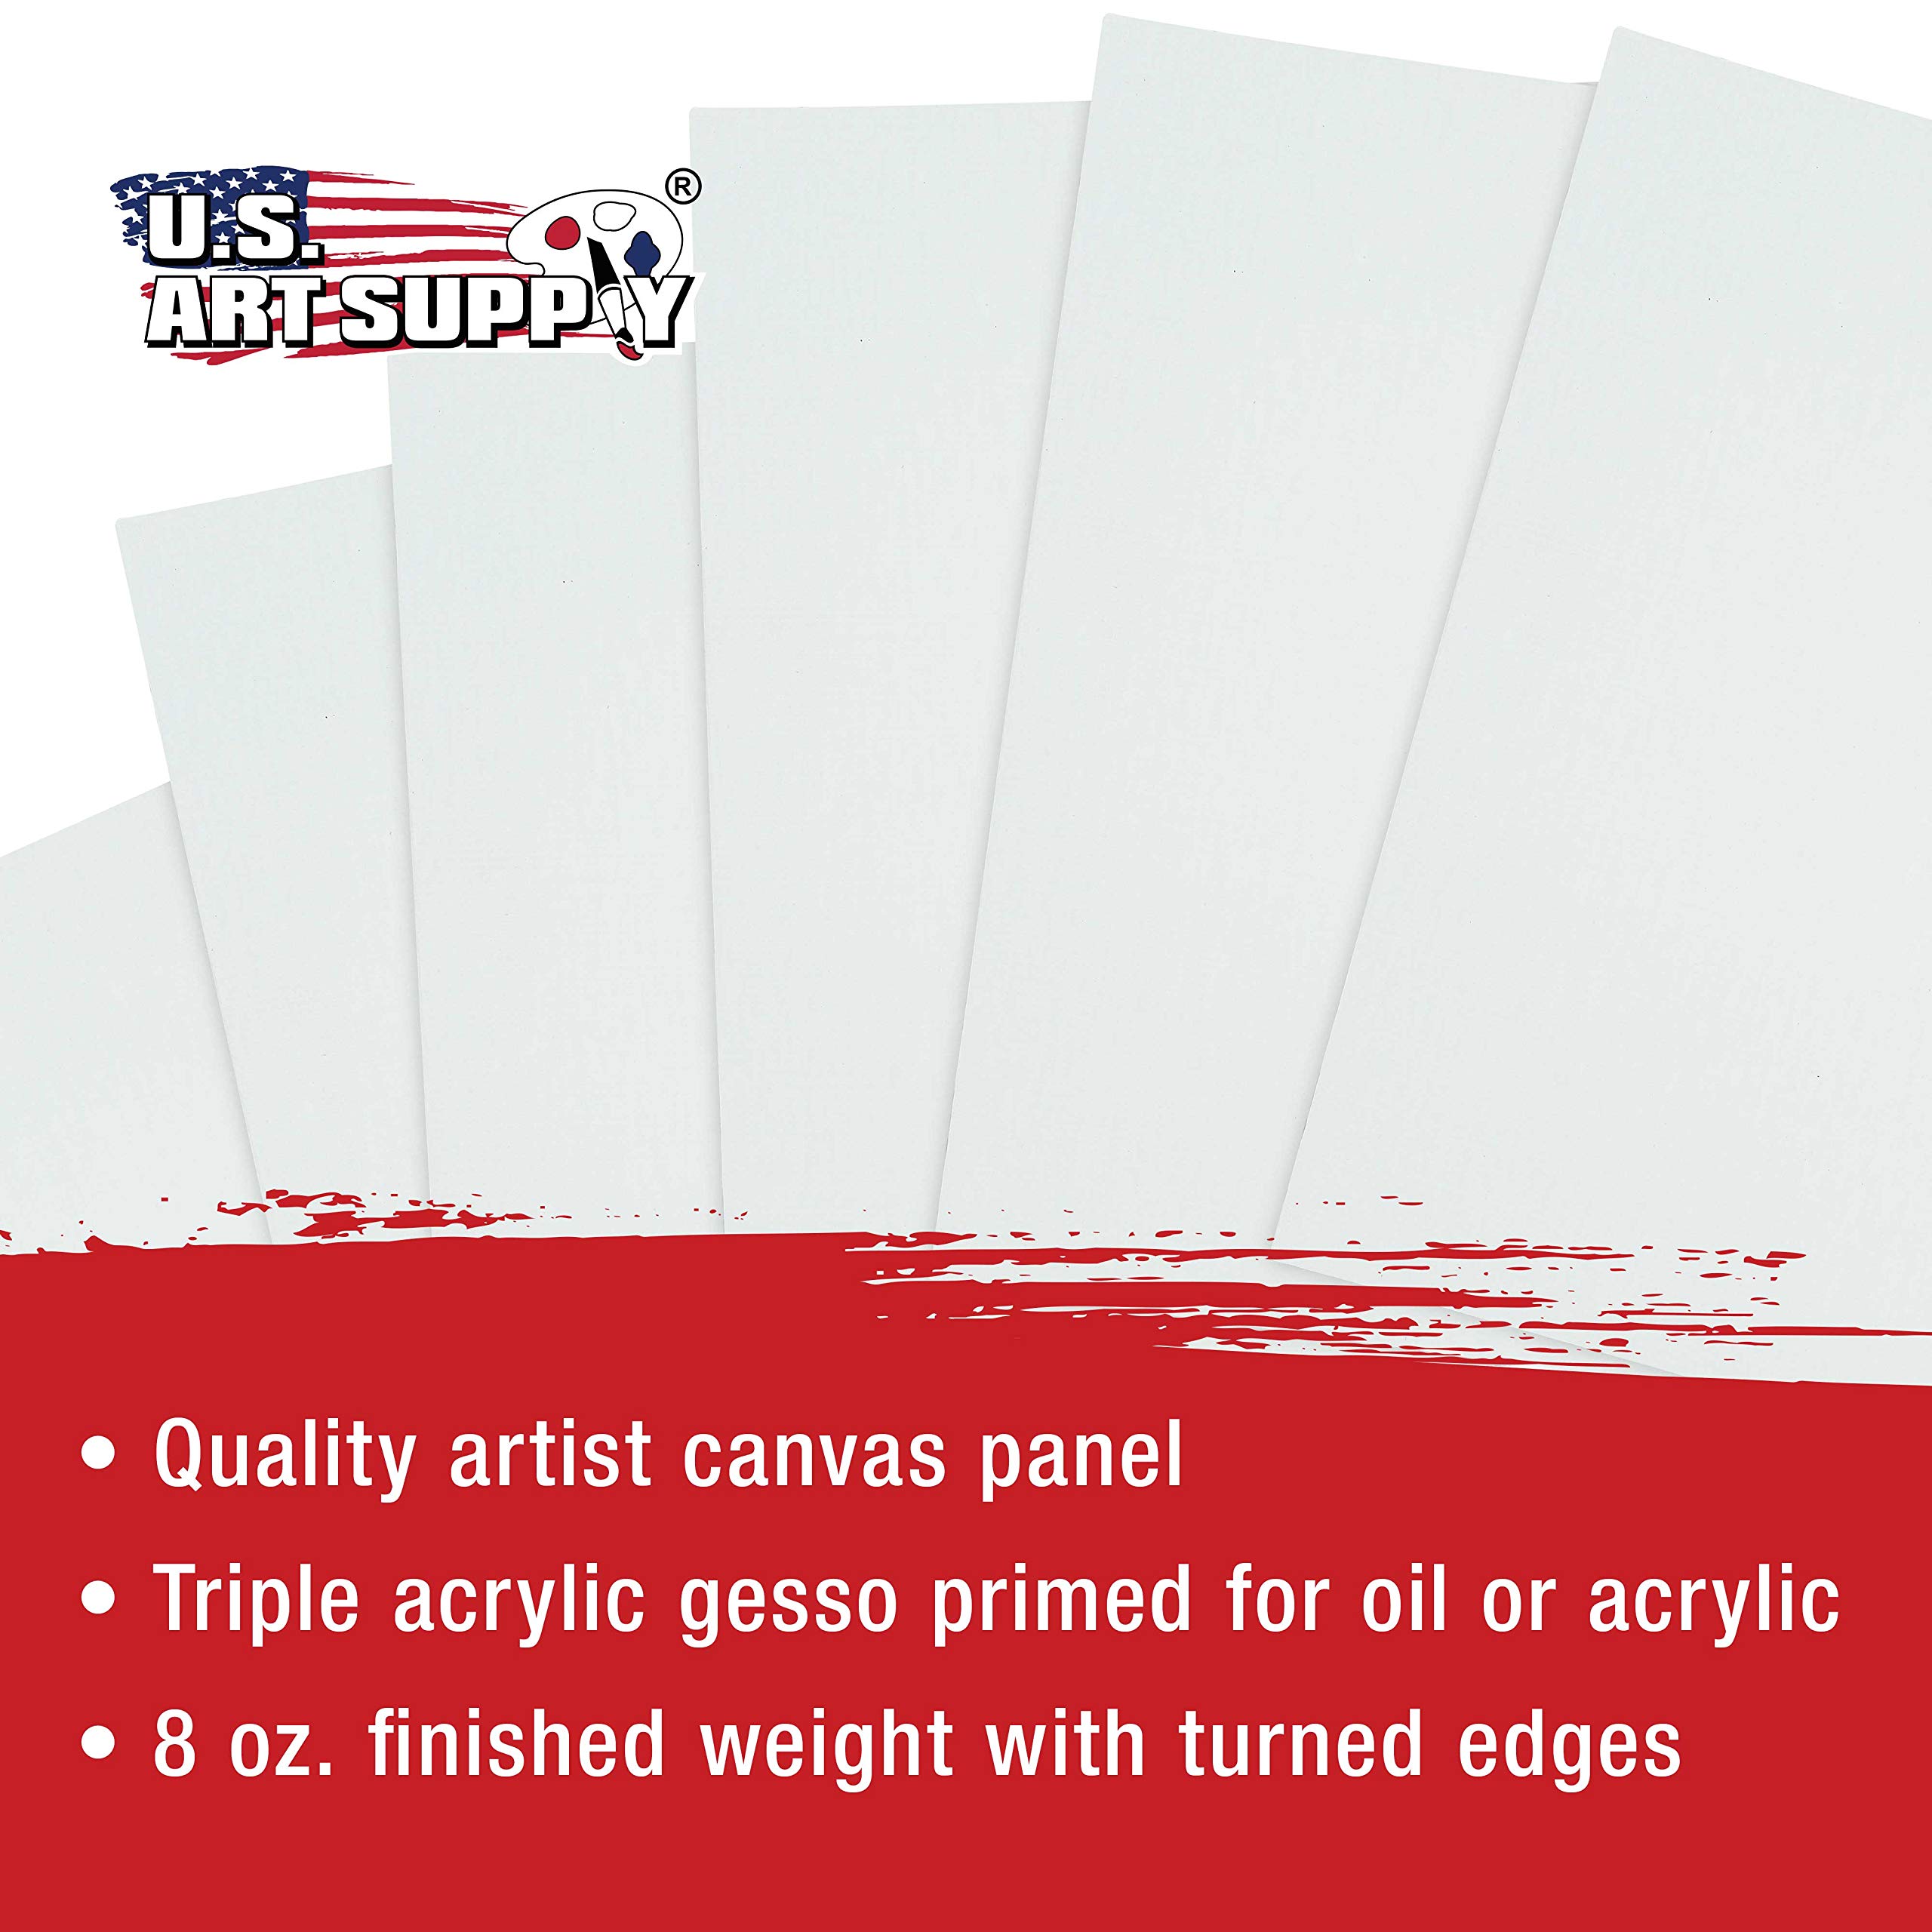 US Art Supply 20 X 24 inch Professional Artist Quality Acid Free Canvas Panel Boards for Painting 12-Pack (1 Full Case of 12 Single Canvas Board Panels)